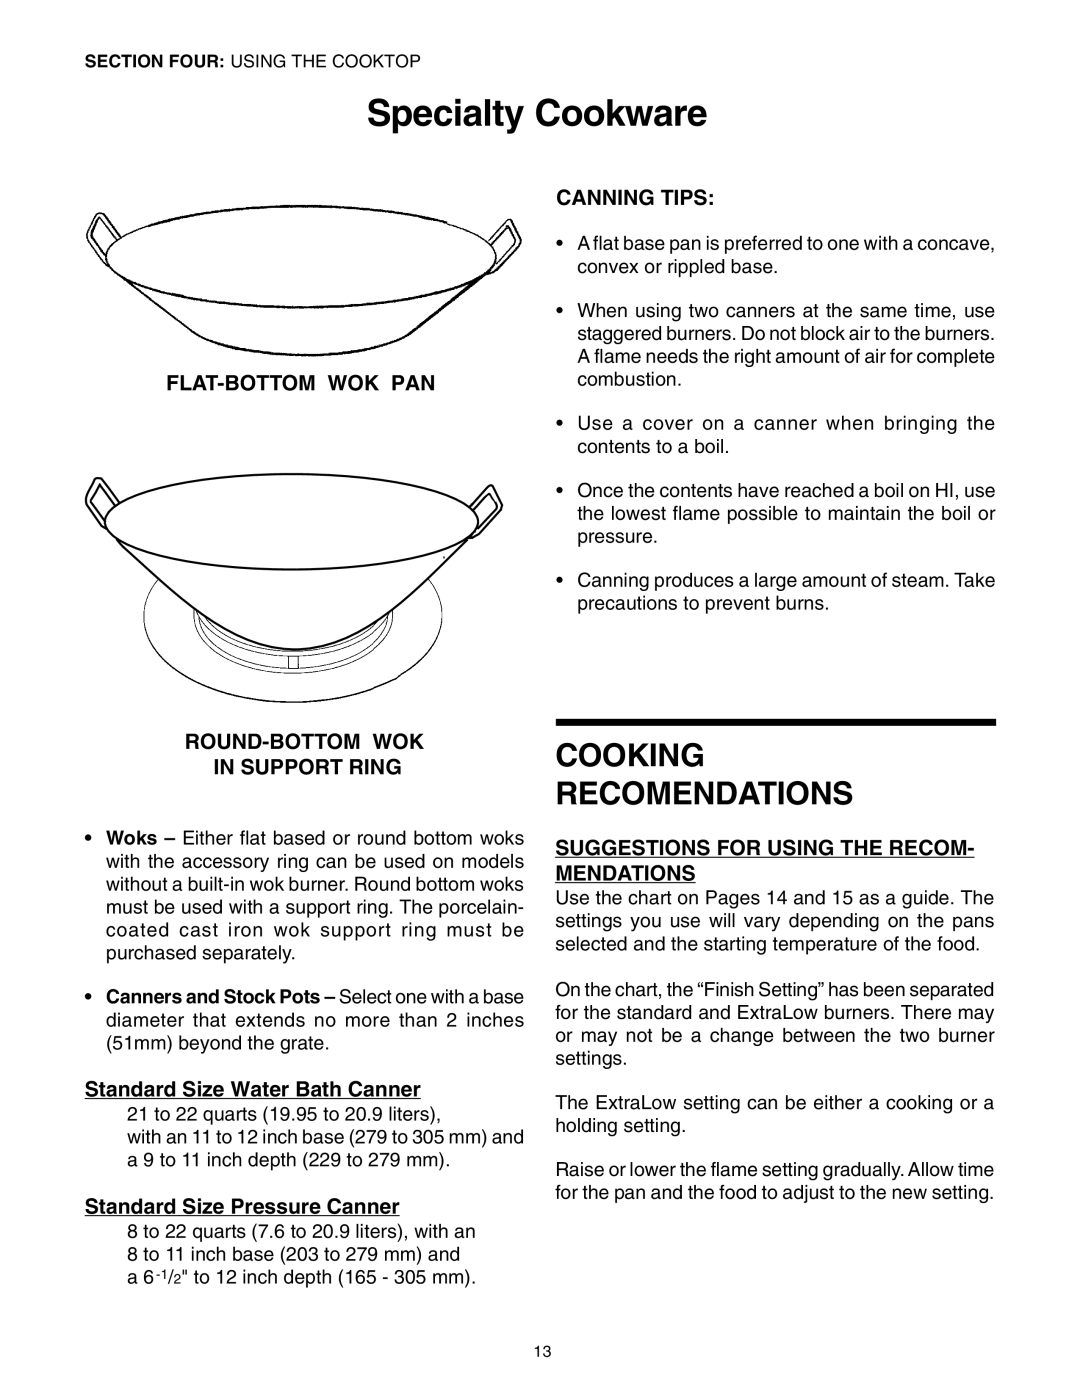 Thermador DP30 Specialty Cookware, Cooking Recomendations, Canning Tips, Flat-Bottomwok Pan, Standard Size Pressure Canner 